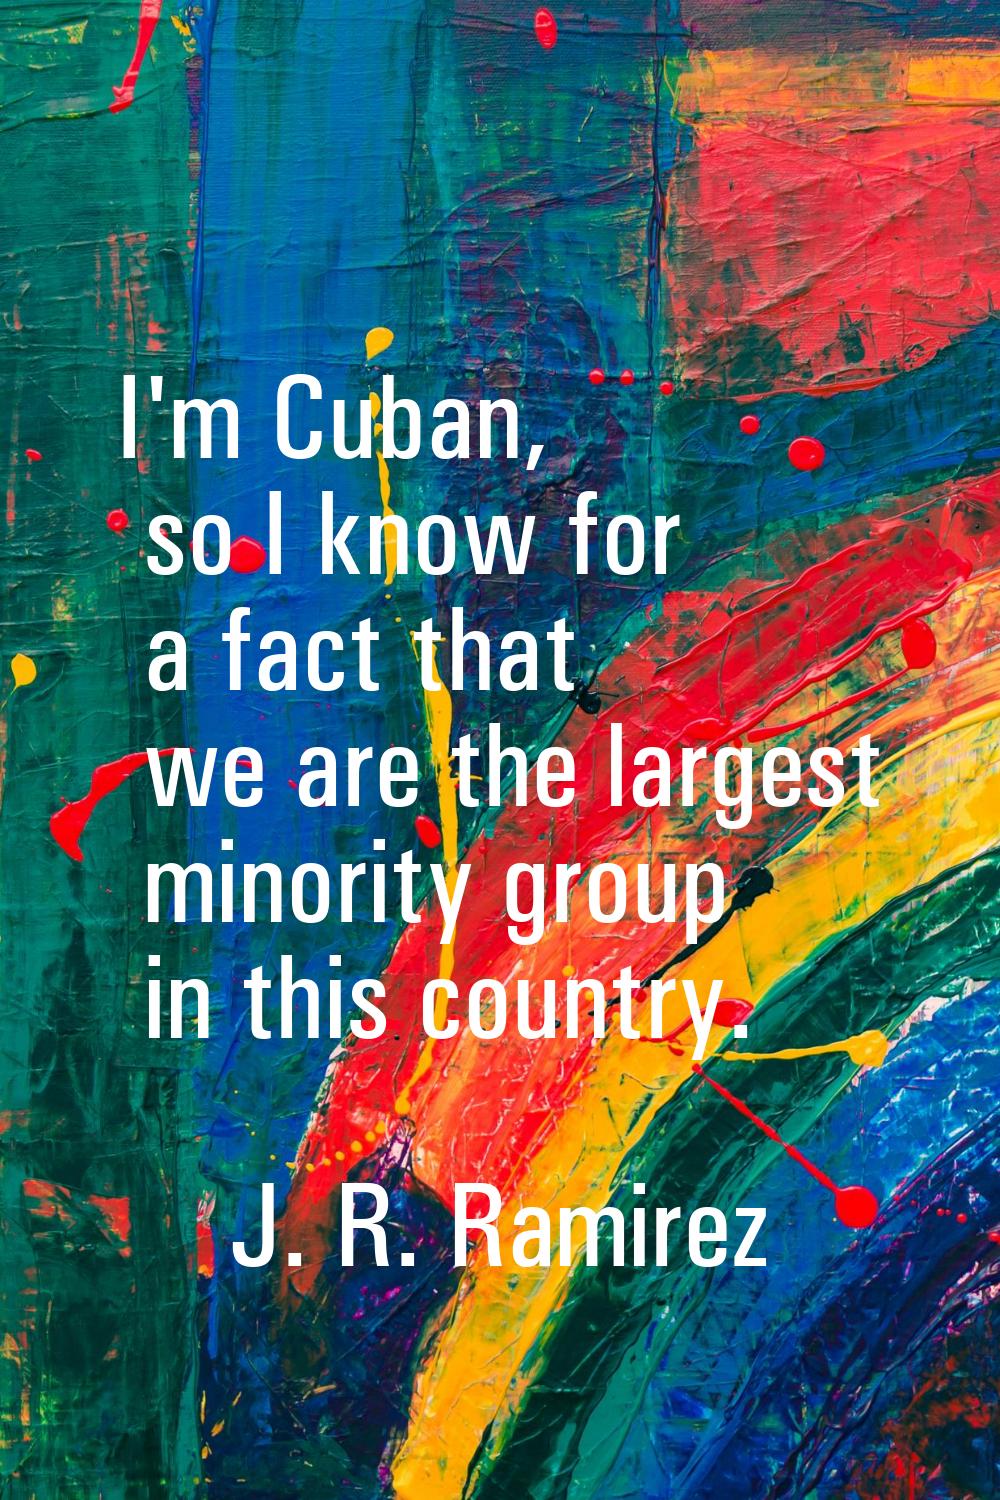 I'm Cuban, so I know for a fact that we are the largest minority group in this country.